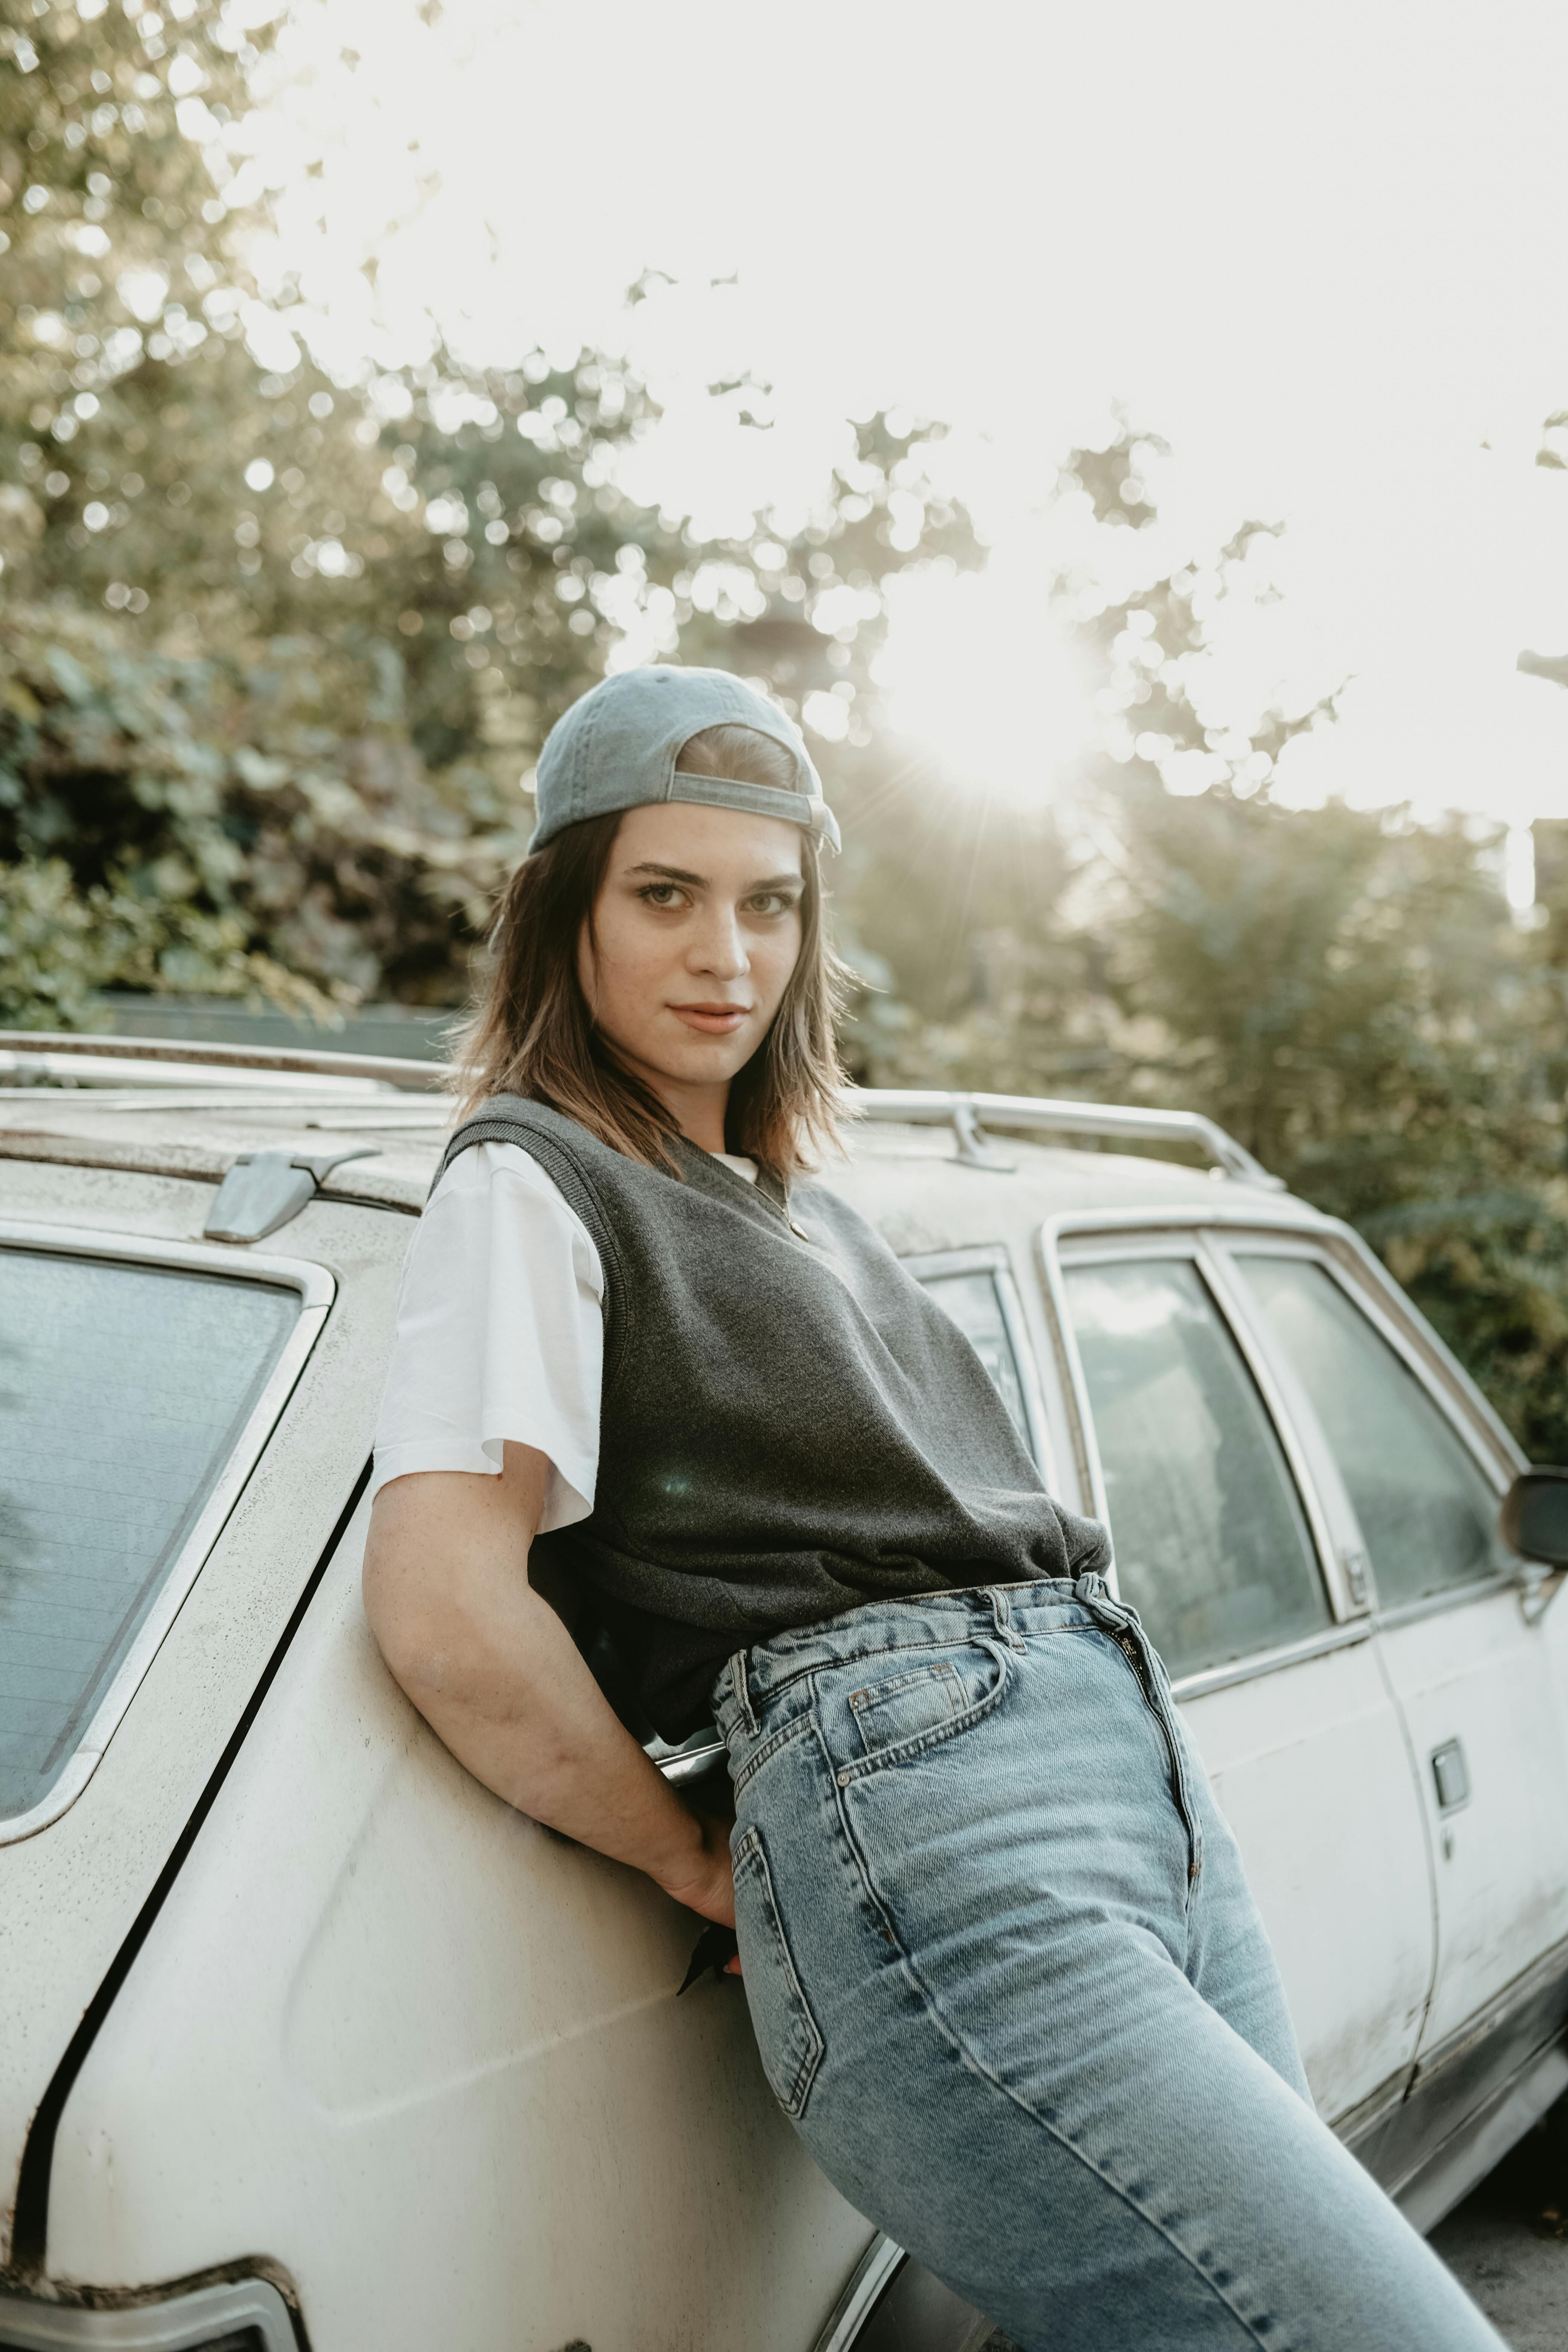 Poses for picture in your car | Gallery posted by jess endrick | Lemon8